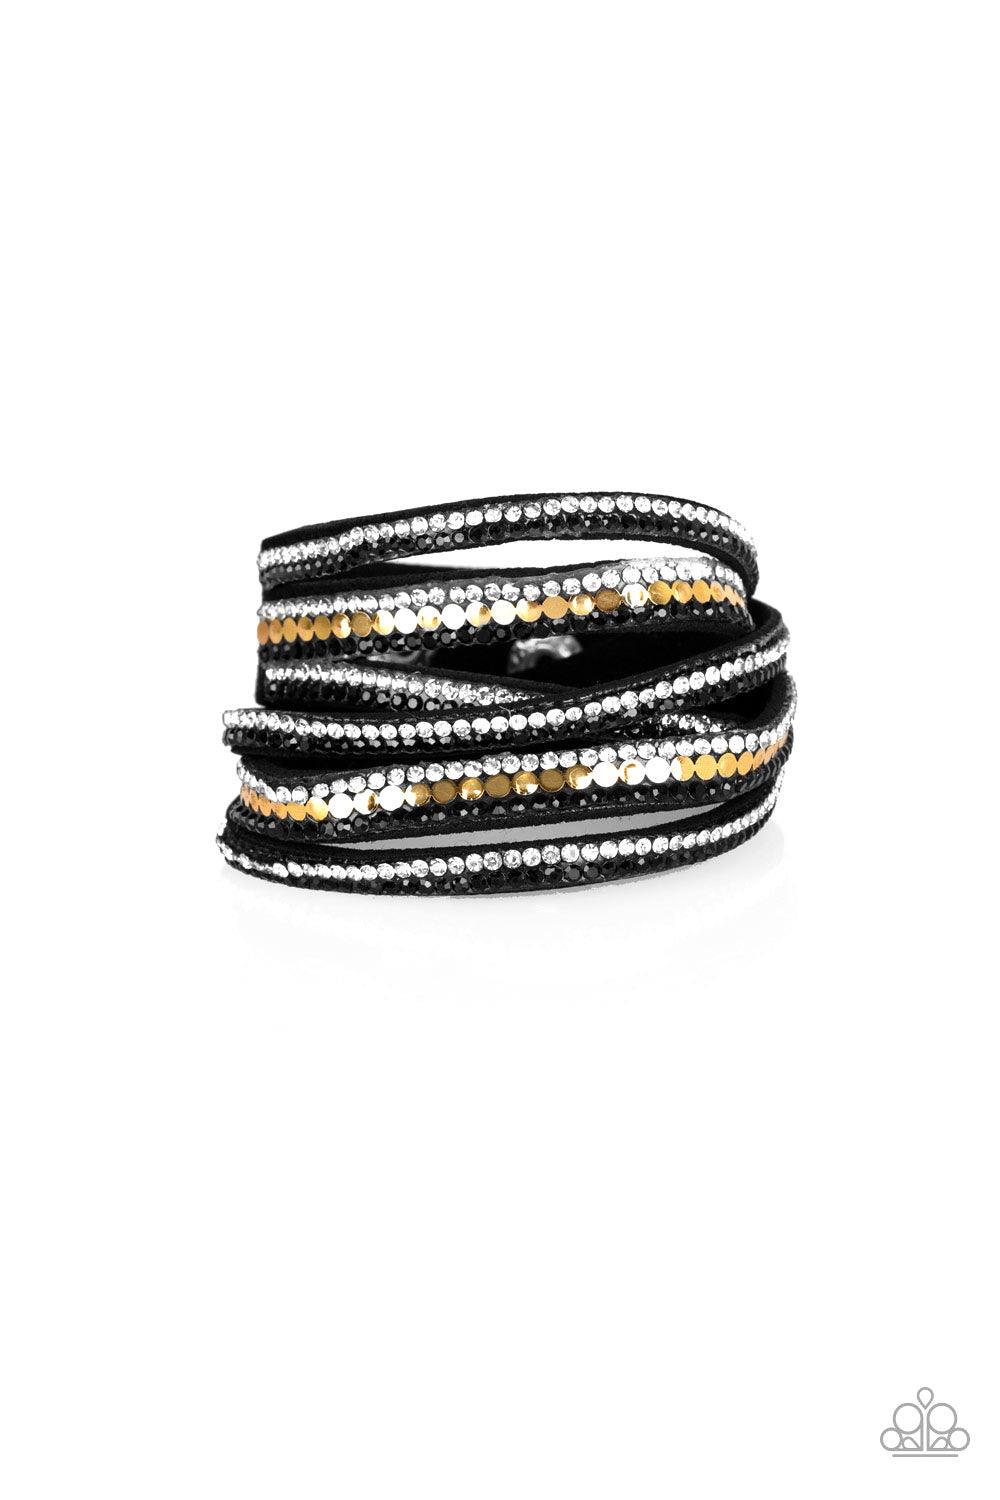 Paparazzi Accessories Rock Star Attitude - Gold Encrusted in rows of glittery black and white rhinestones and flat gold studs, three strands of black suede wrap around the wrist for a sassy look. The elongated band allows for a trendy double wrap around t